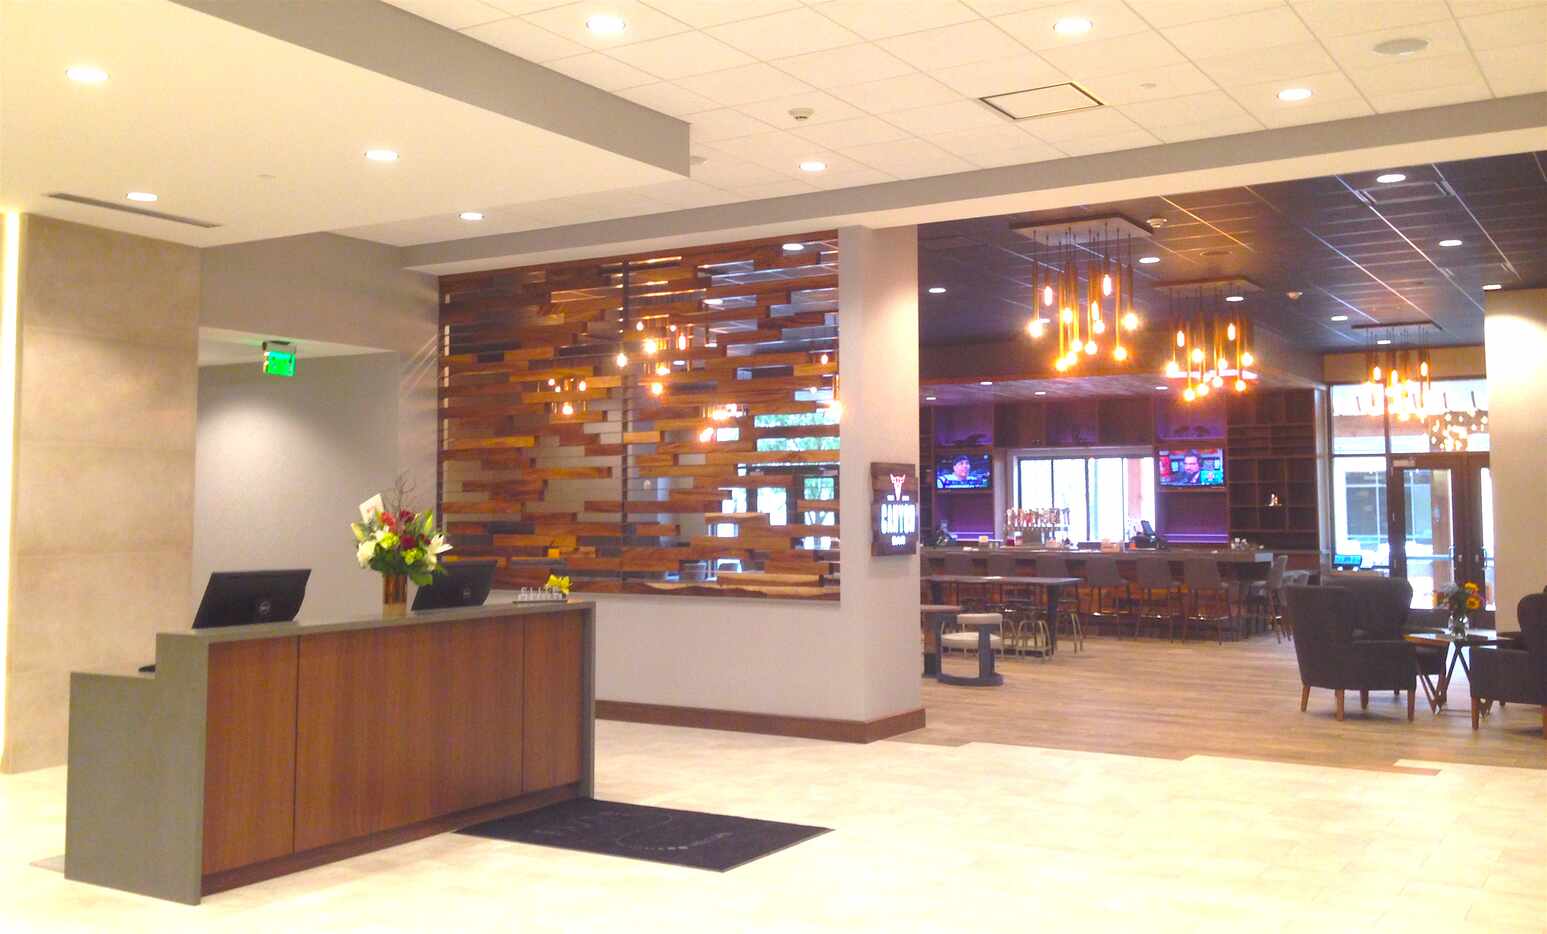 The new Delta by Marriott Hotel has a restaurant by Dallas chef Stephan Pyles.